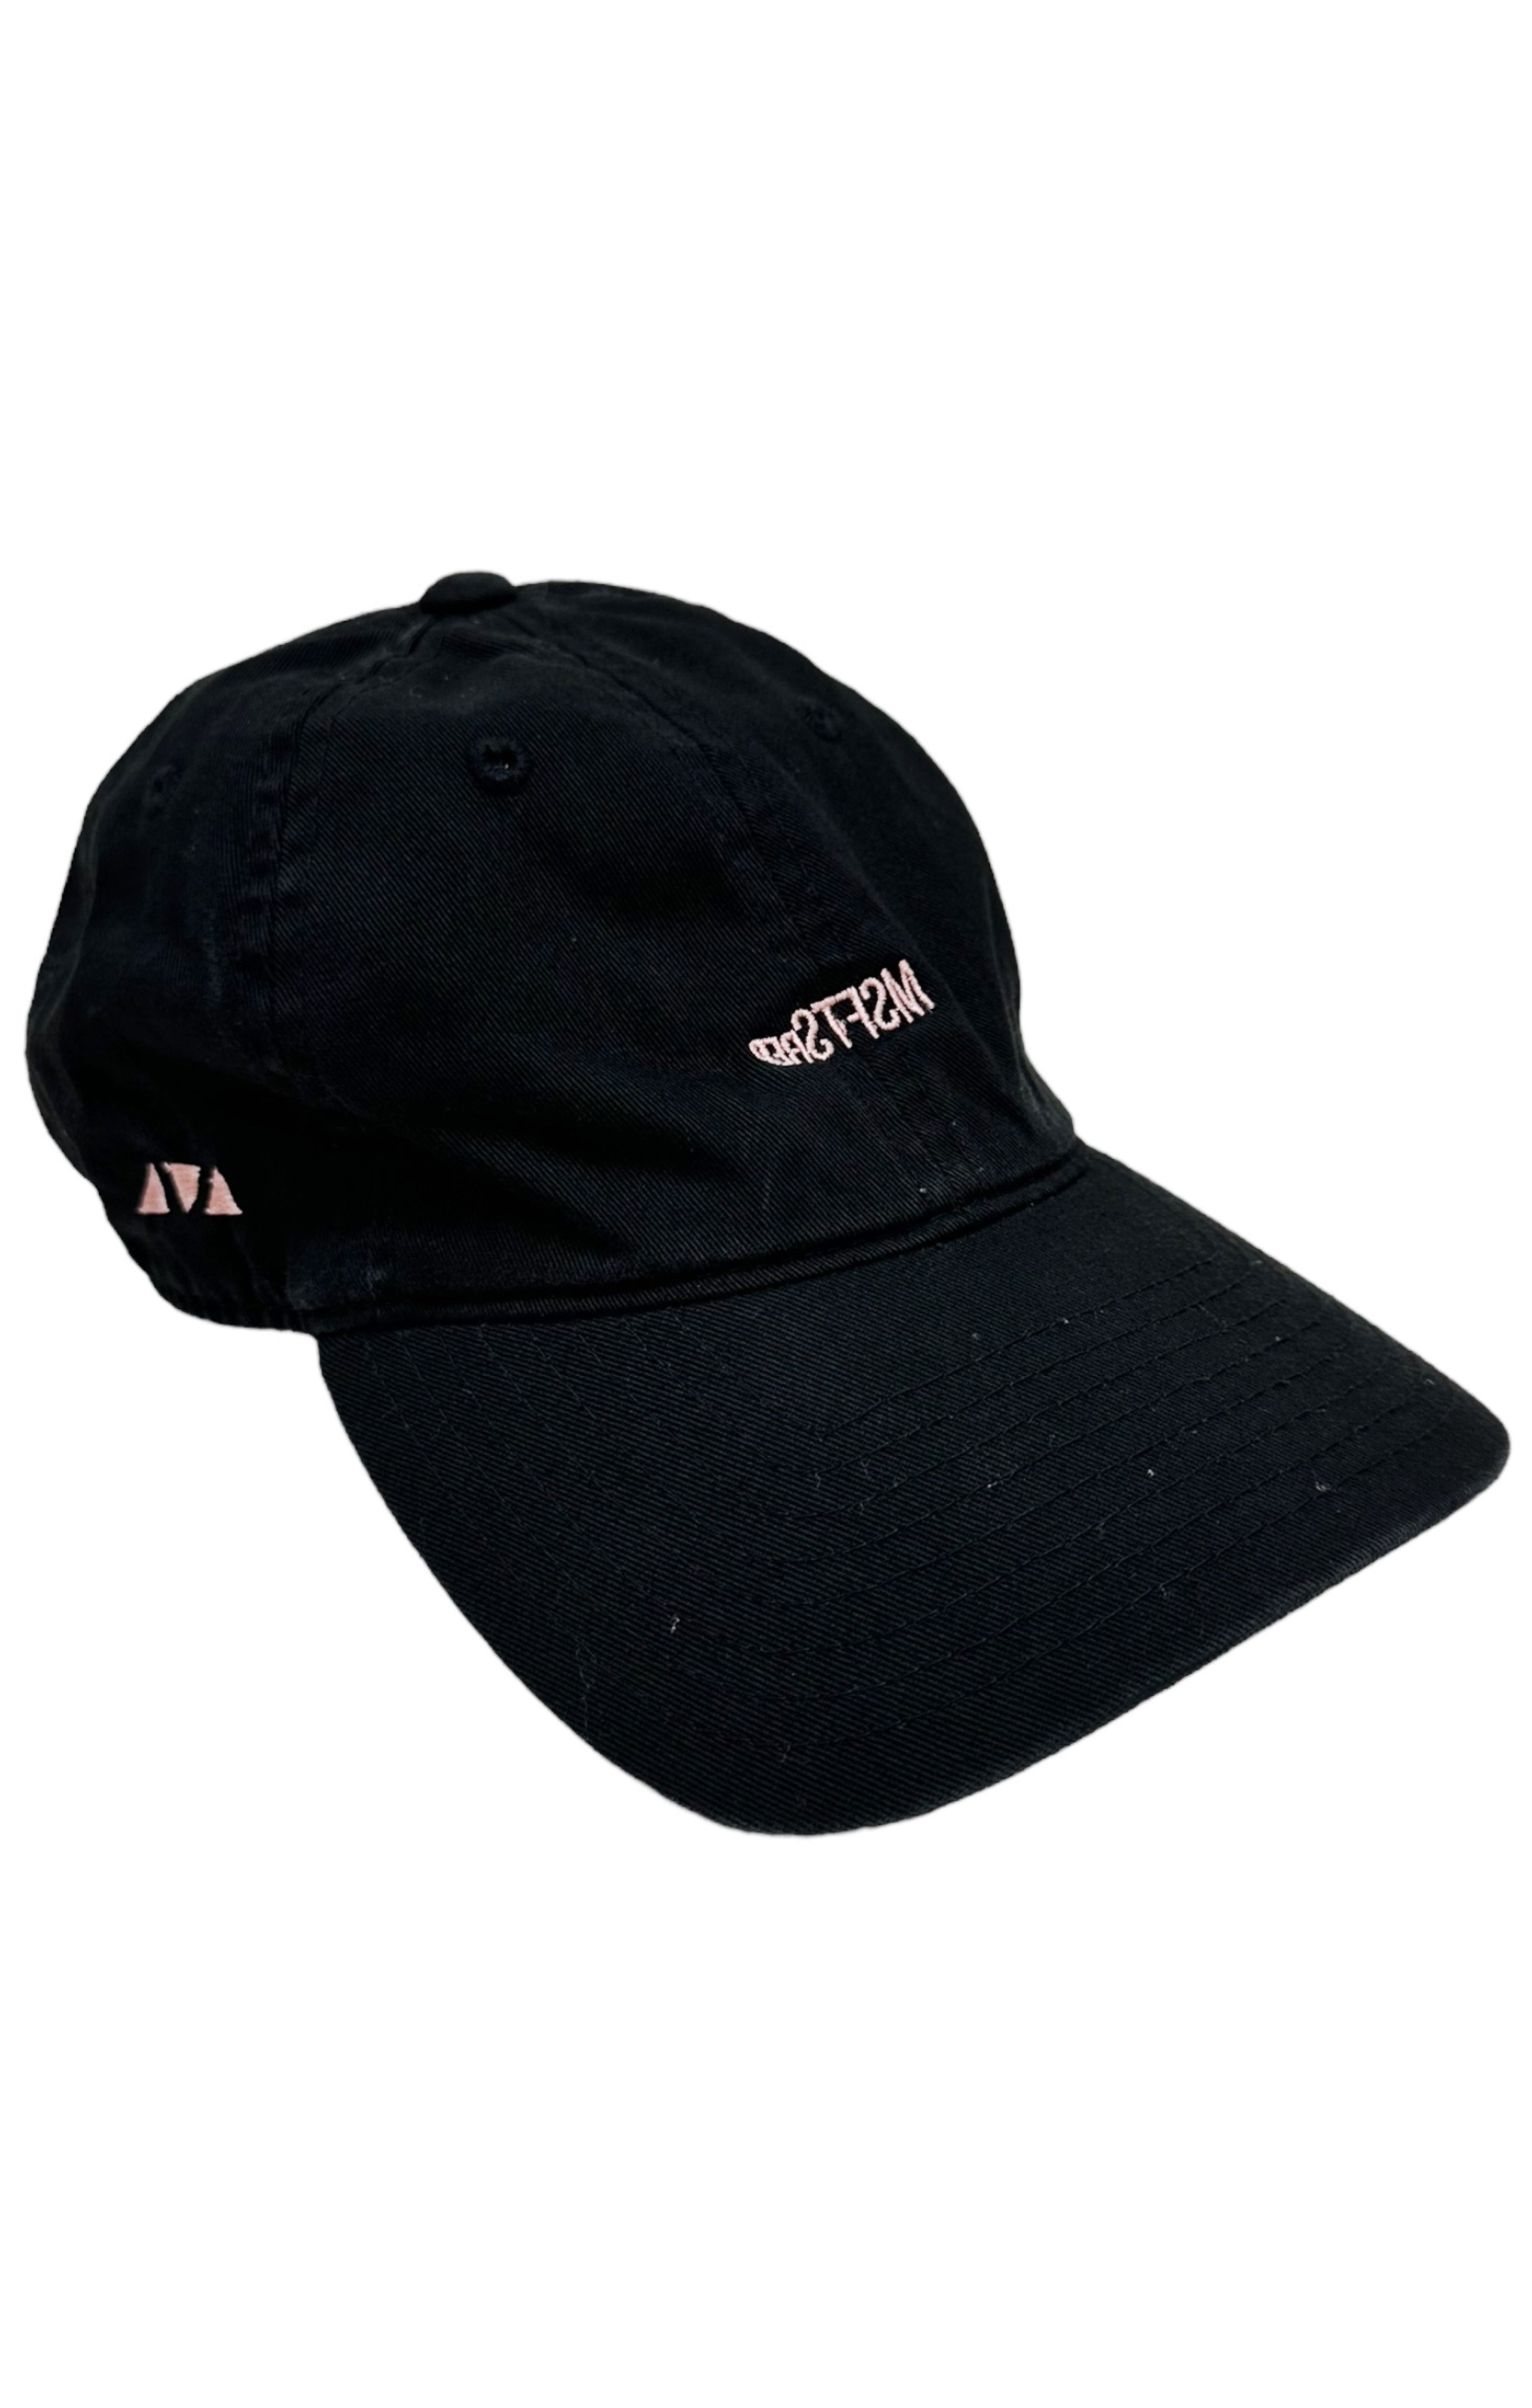 MSFTSREP (RARE) Hat Size: No size tags, fits like S